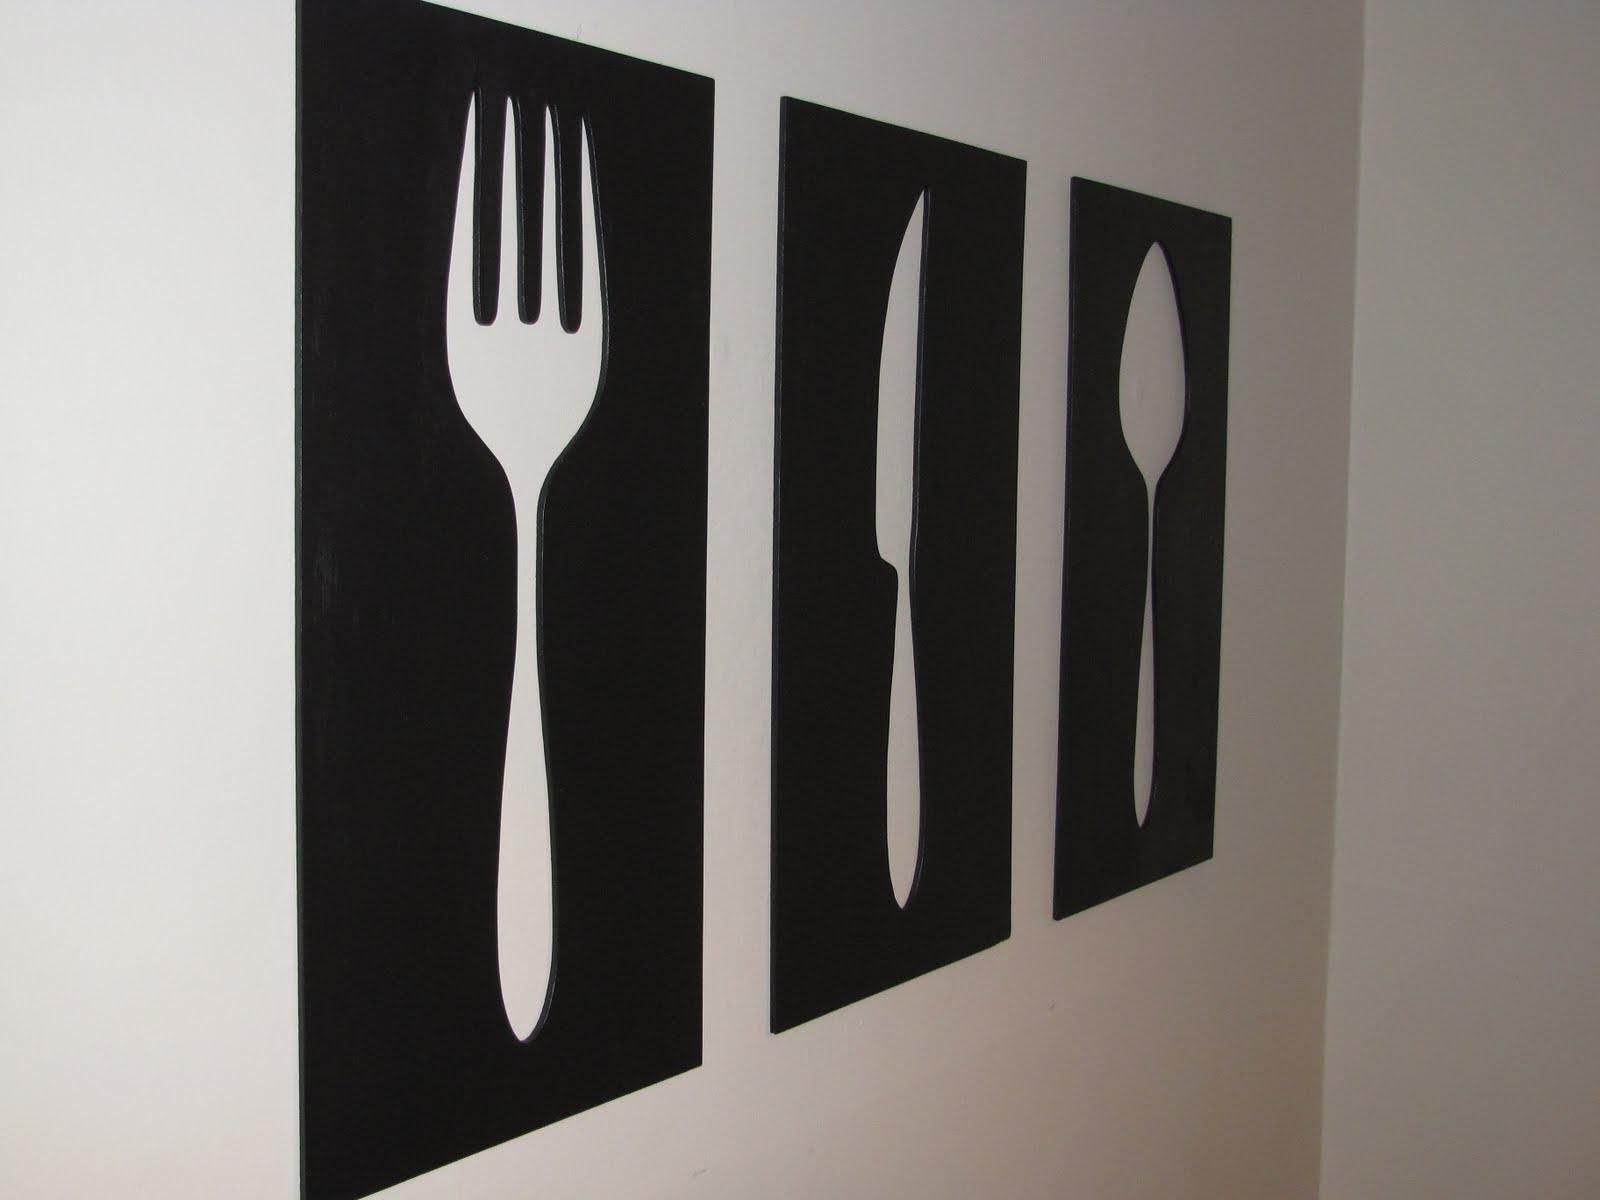 Show Tell Share: Fork, Knife And Spoon Throughout Oversized Cutlery Wall Art (View 10 of 20)